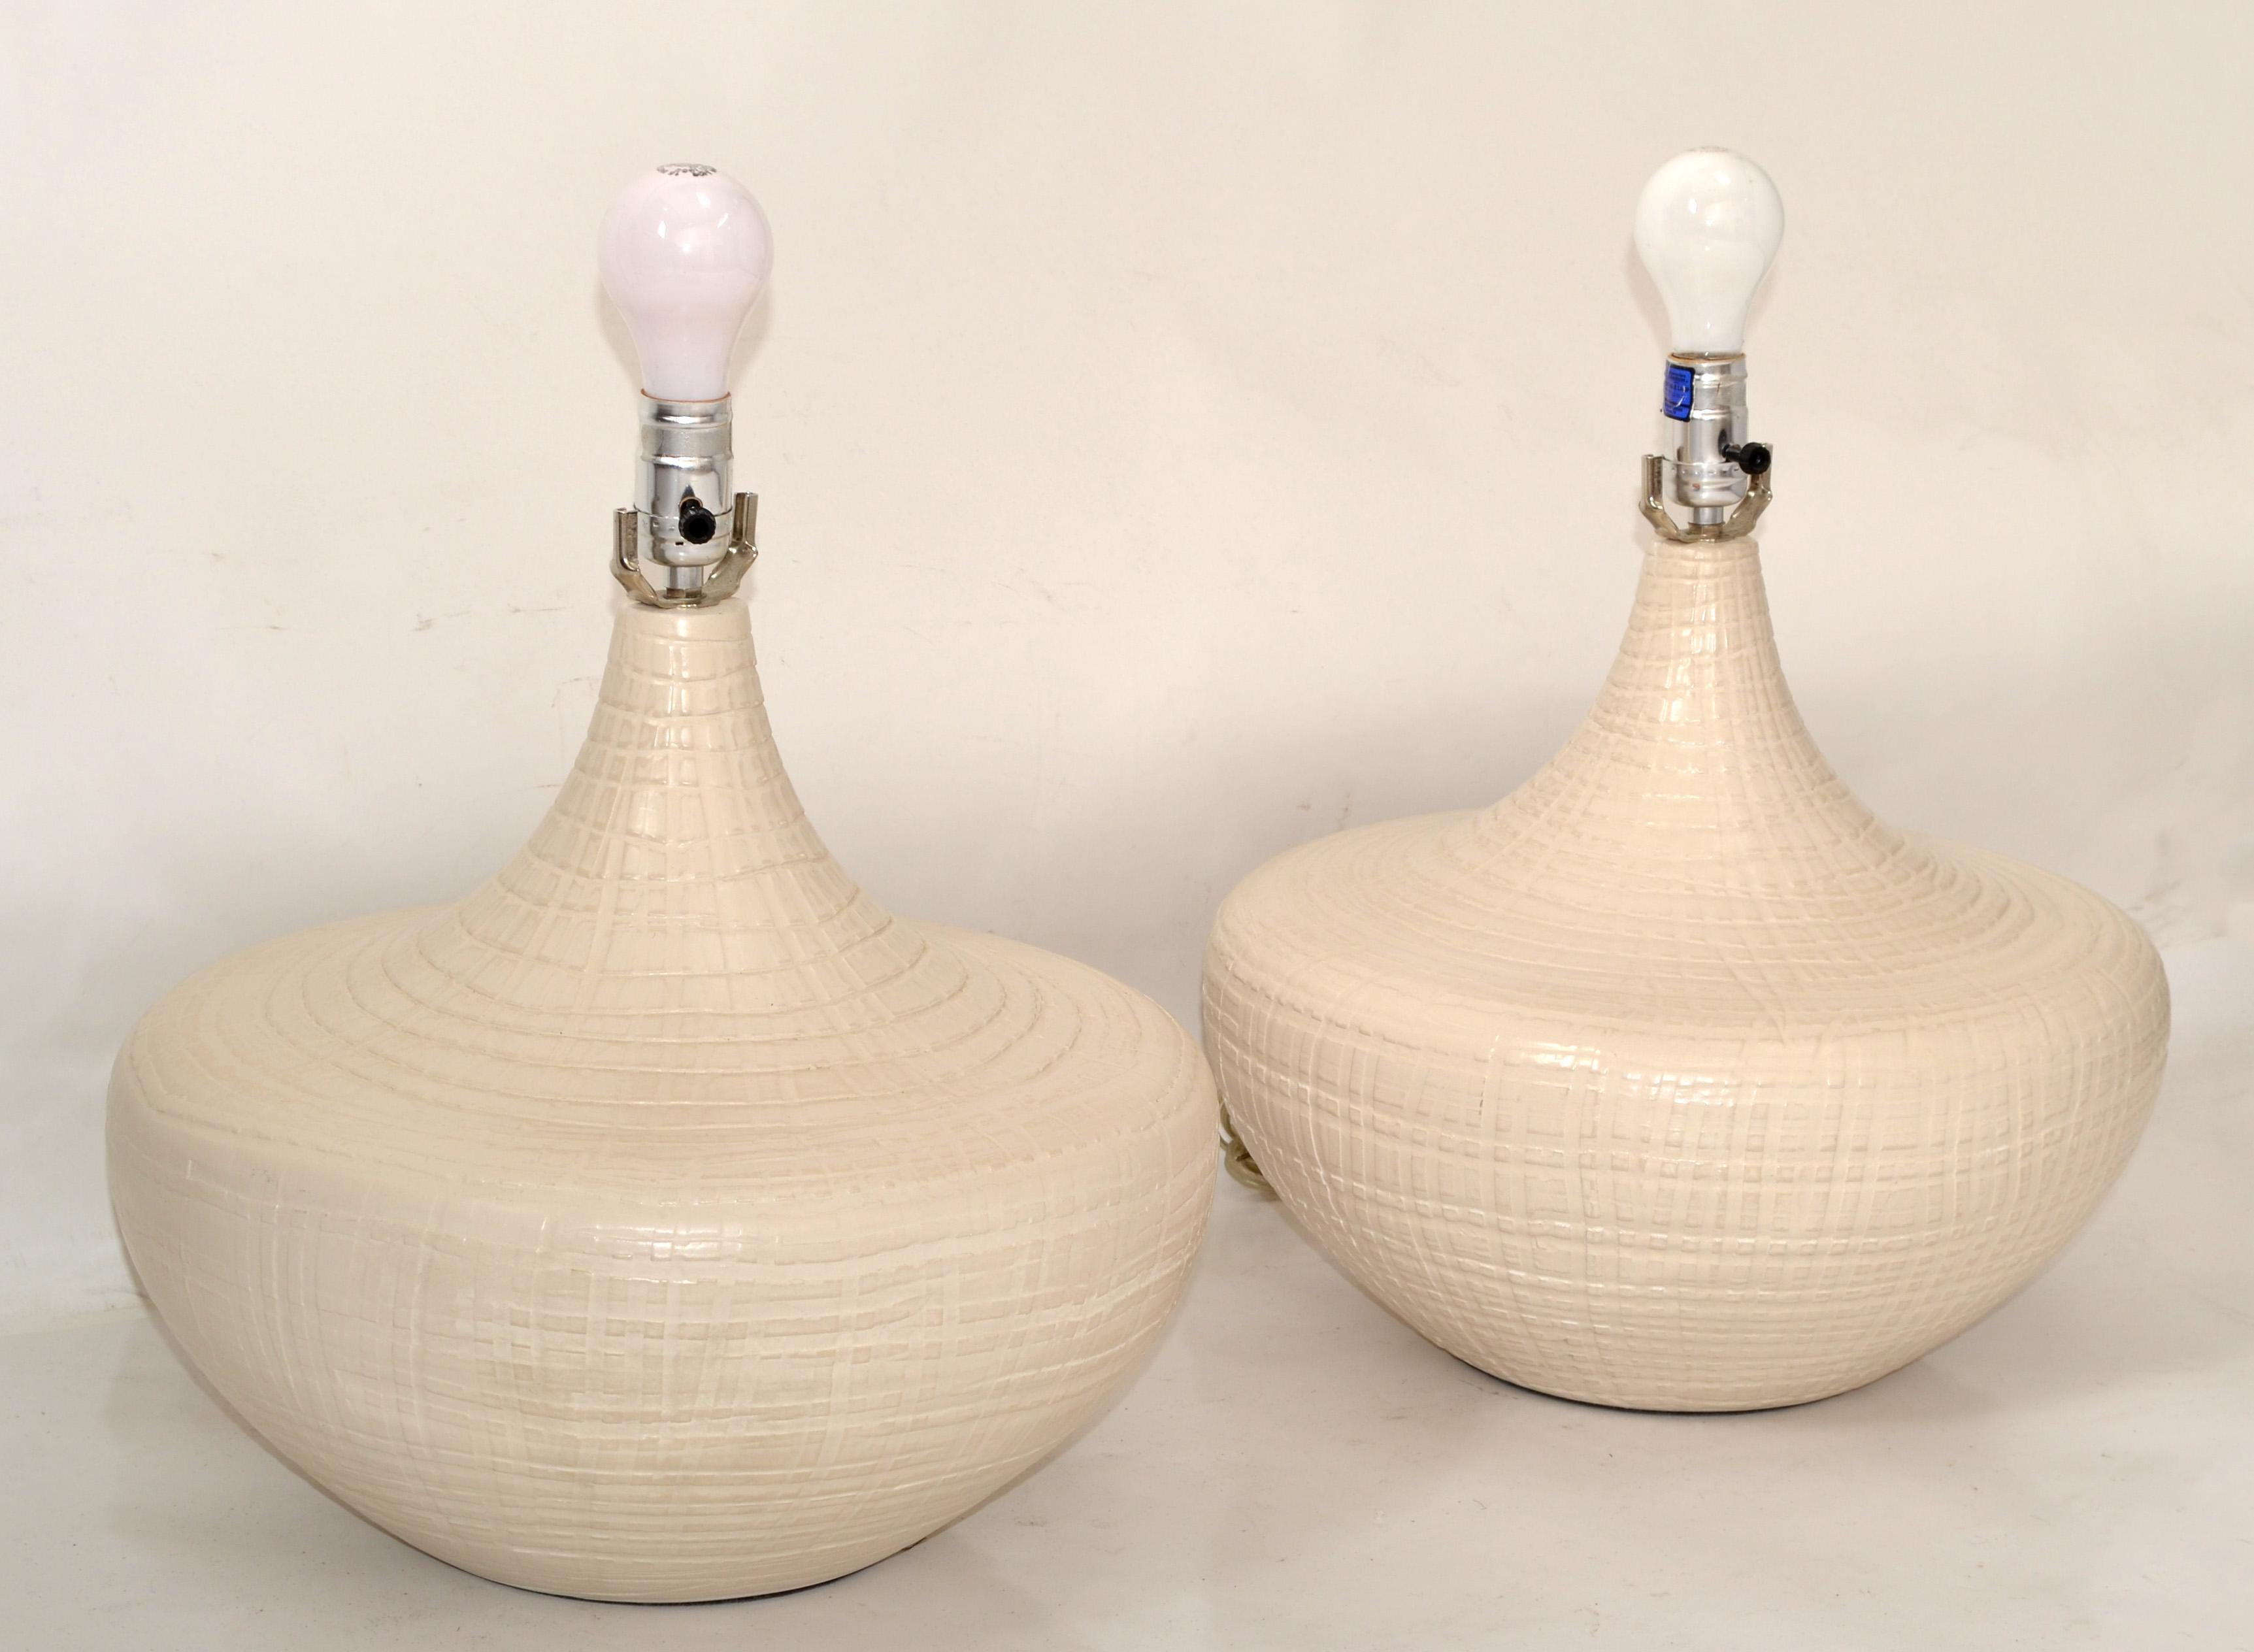 Mid-Century Modern Pair of Beige deeply incised vintage ceramic Table Lamps in a round large scale with lacquer finish.
UL Listed, each Lamp takes a regular or LED Light bulb.
No Harp, Finial, Shade.
Great Lamps for the Master Bedroom, on Top of the